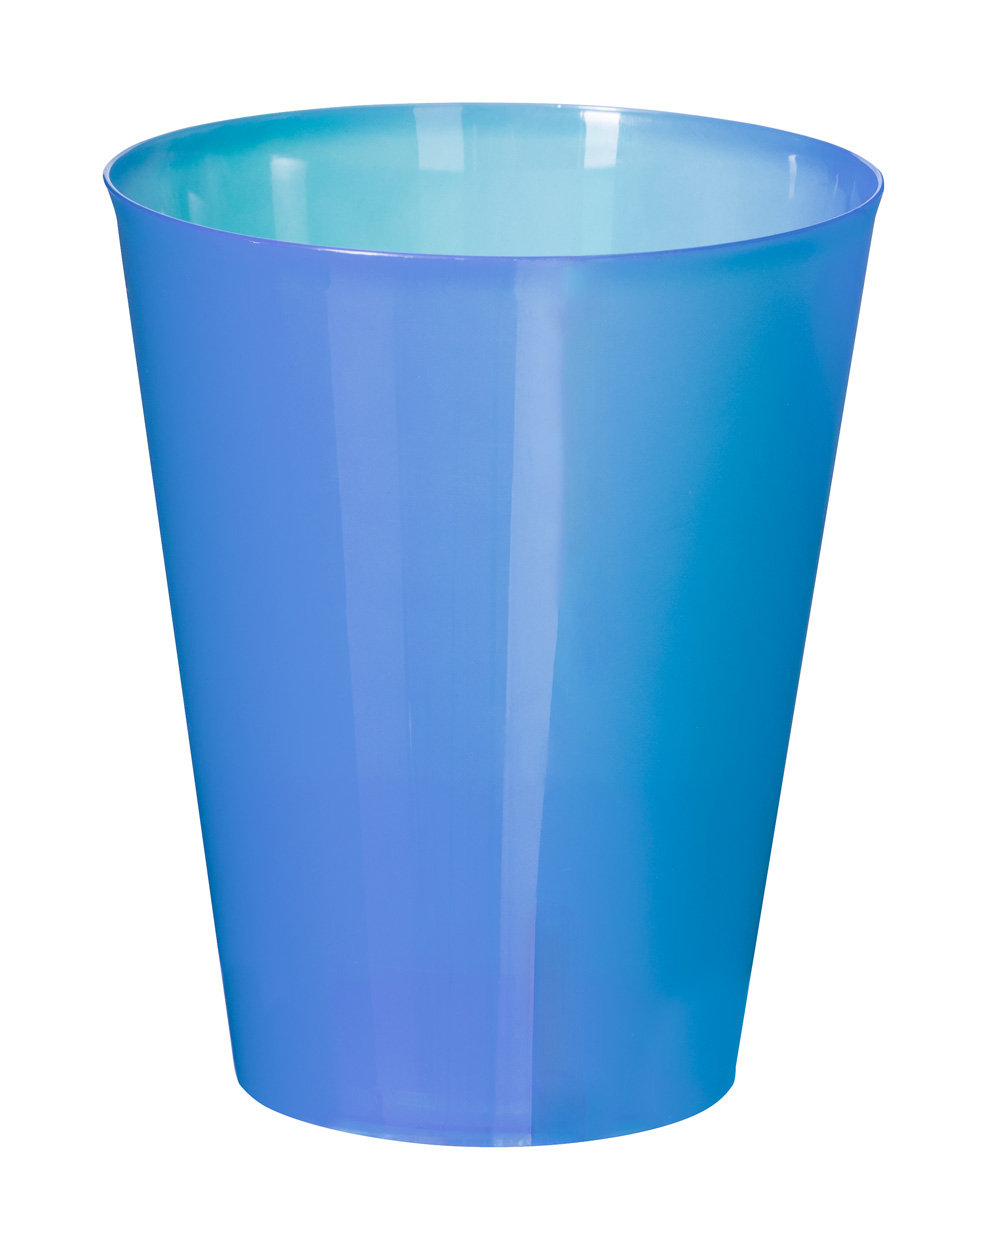 Colorbert reusable cup for events - blau